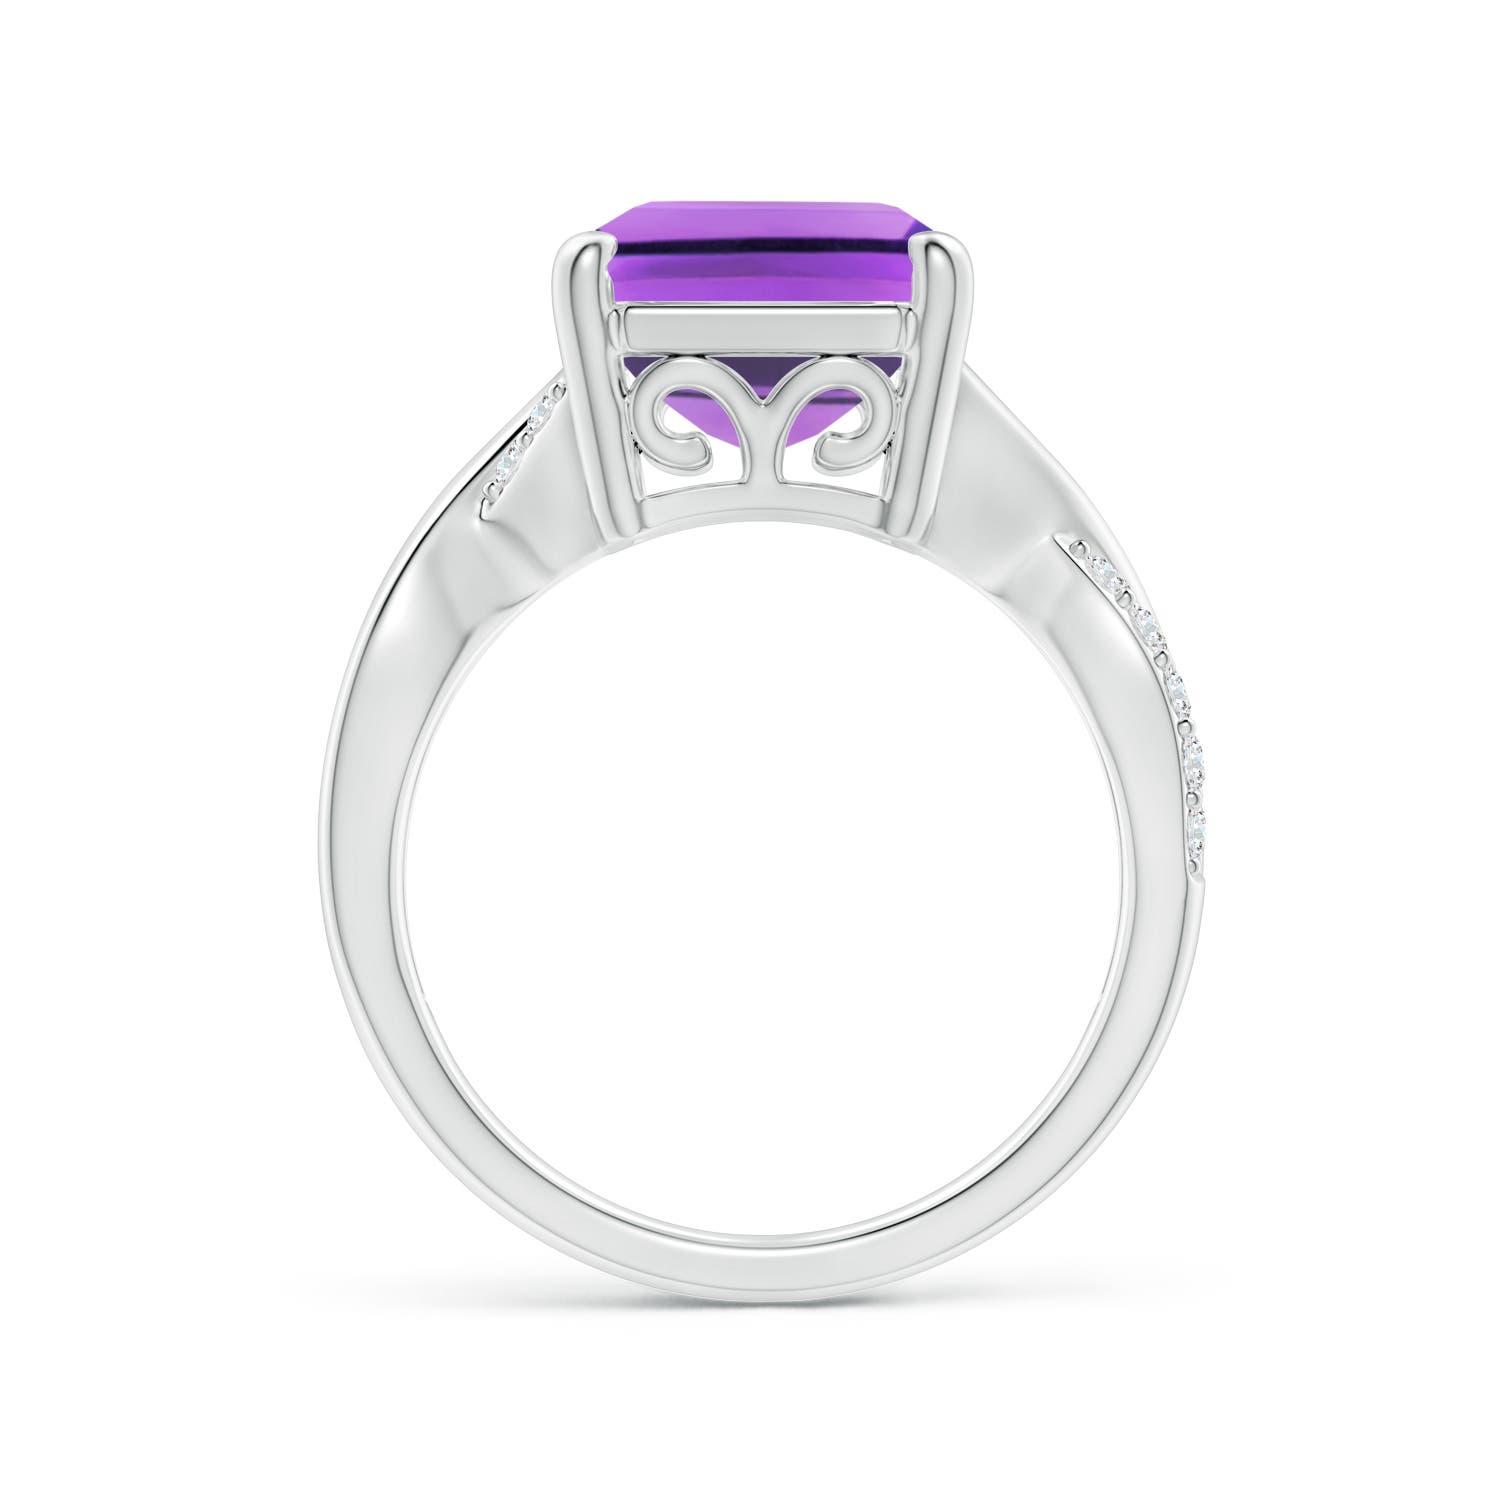 AA - Amethyst / 6.7 CT / 14 KT White Gold